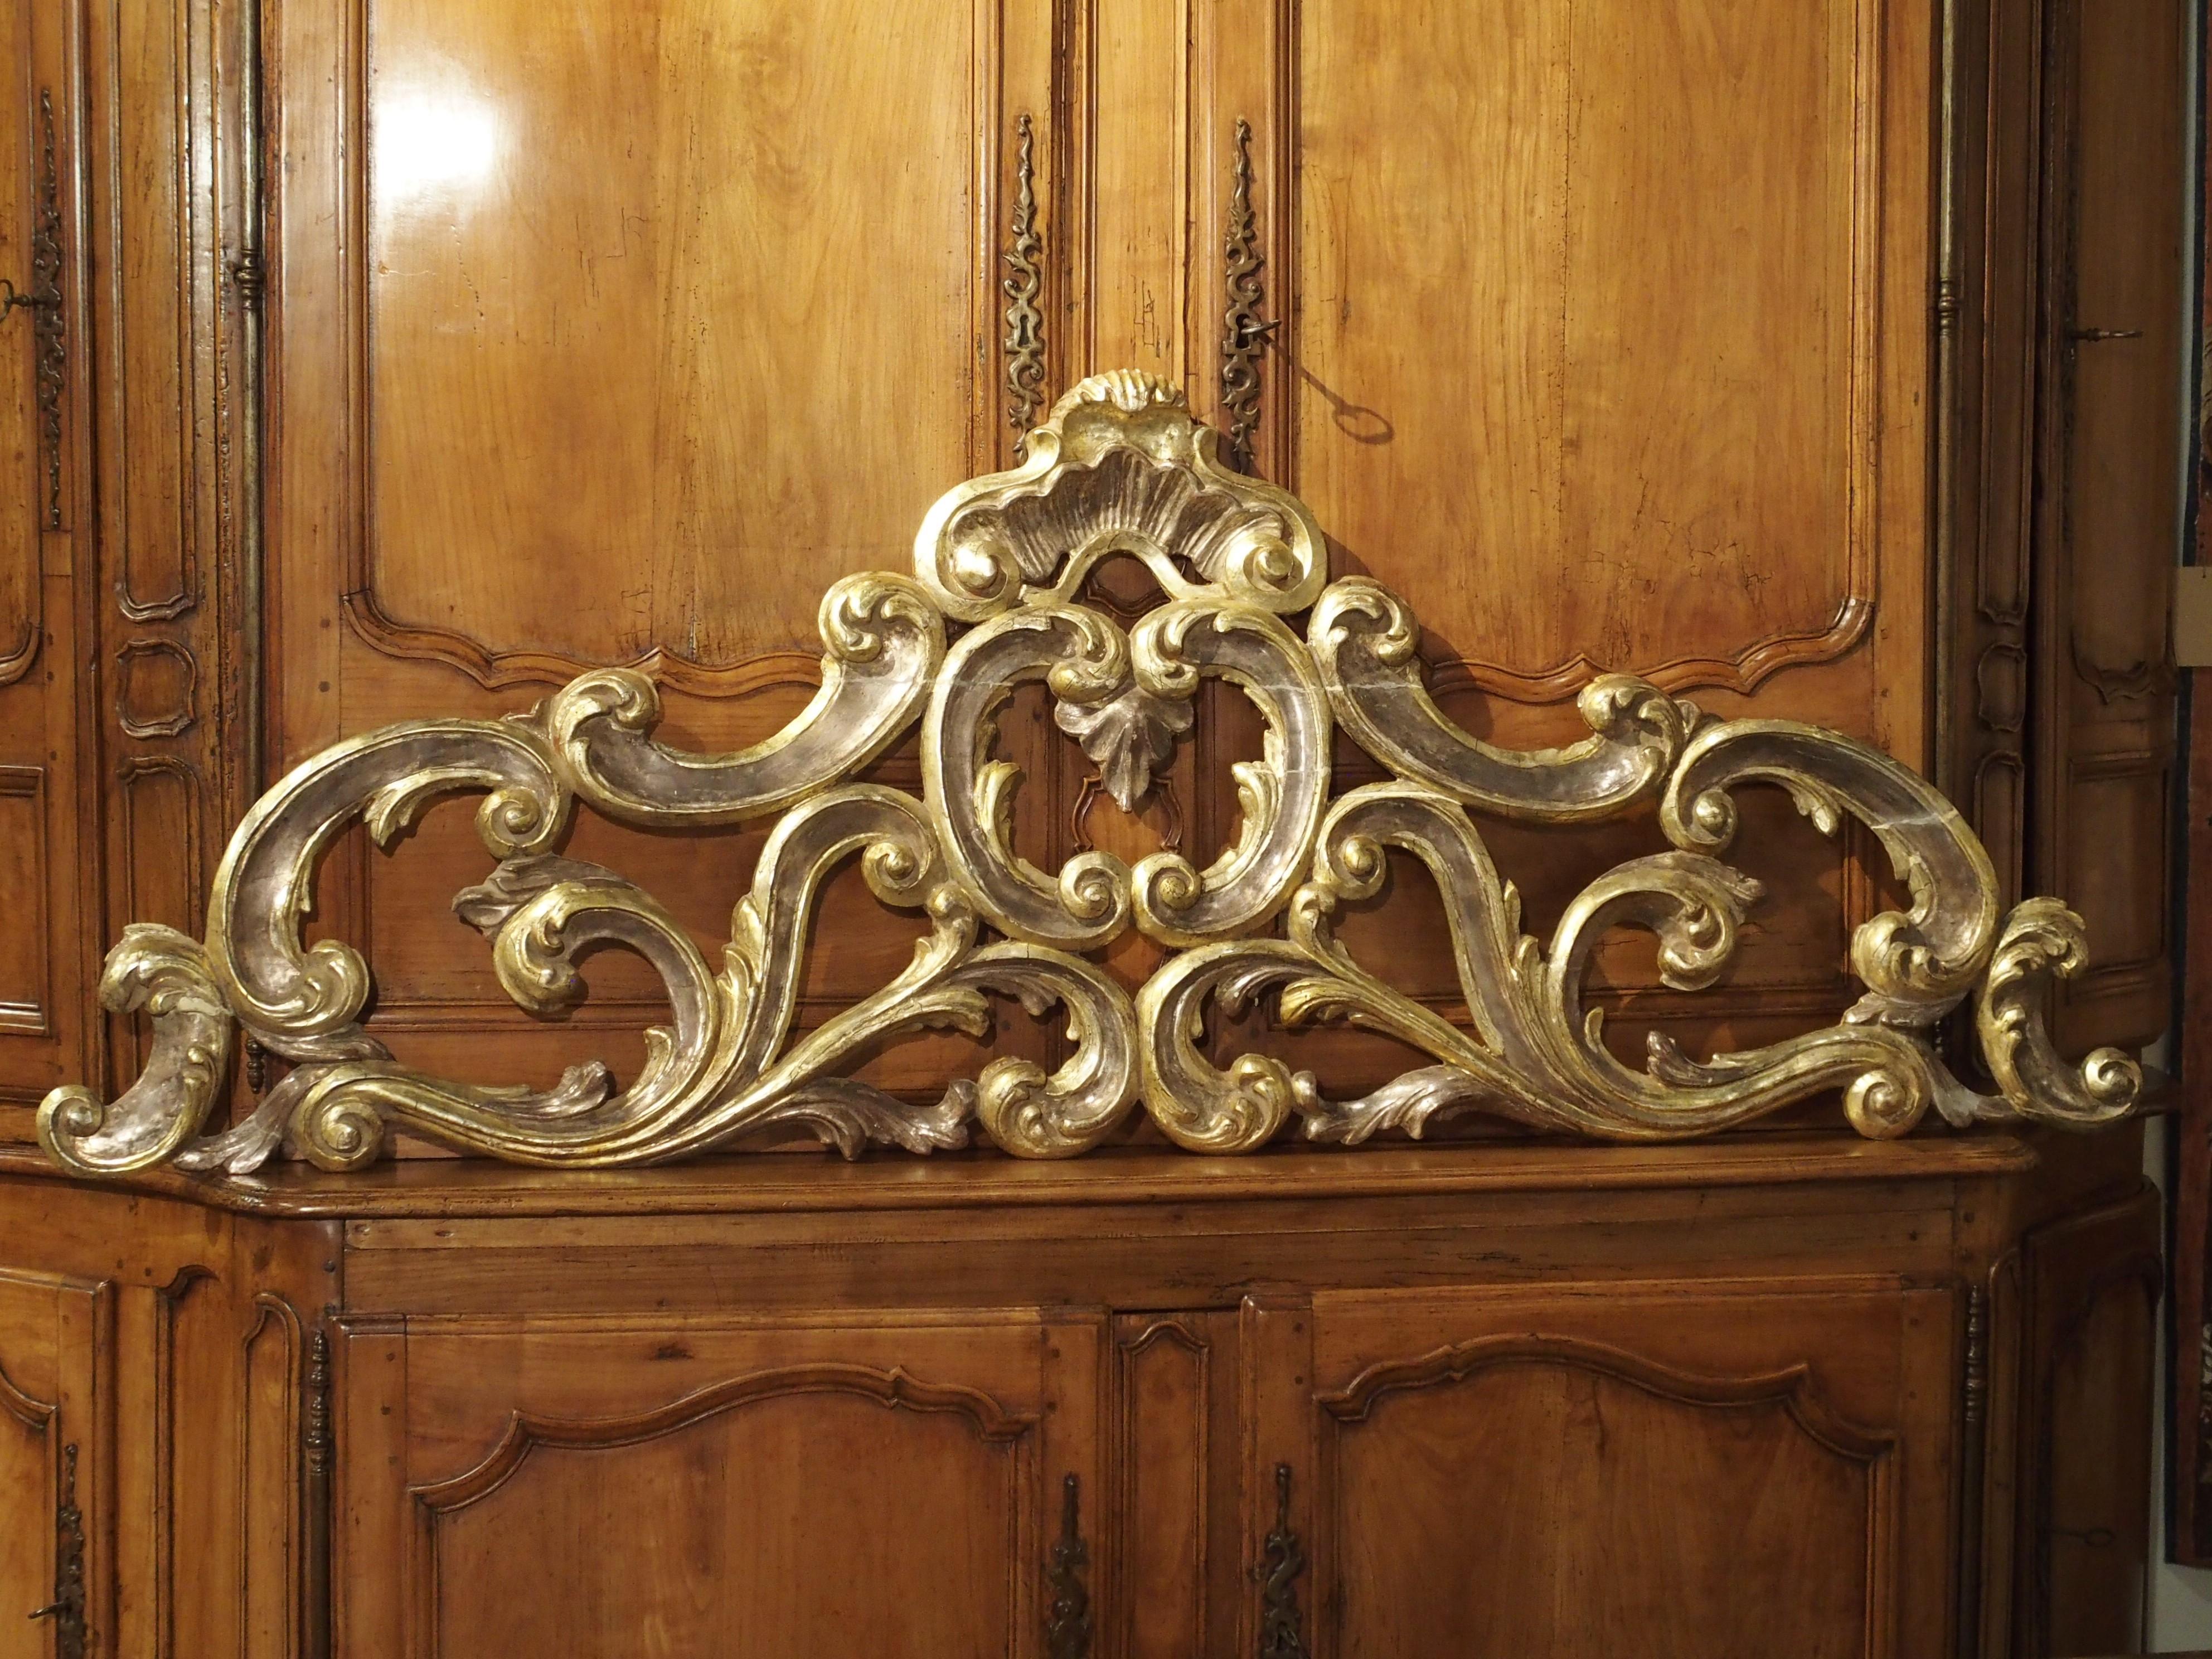 Italian Sculpted Antique Giltwood Overdoor or Headboard from Italy, circa 1850